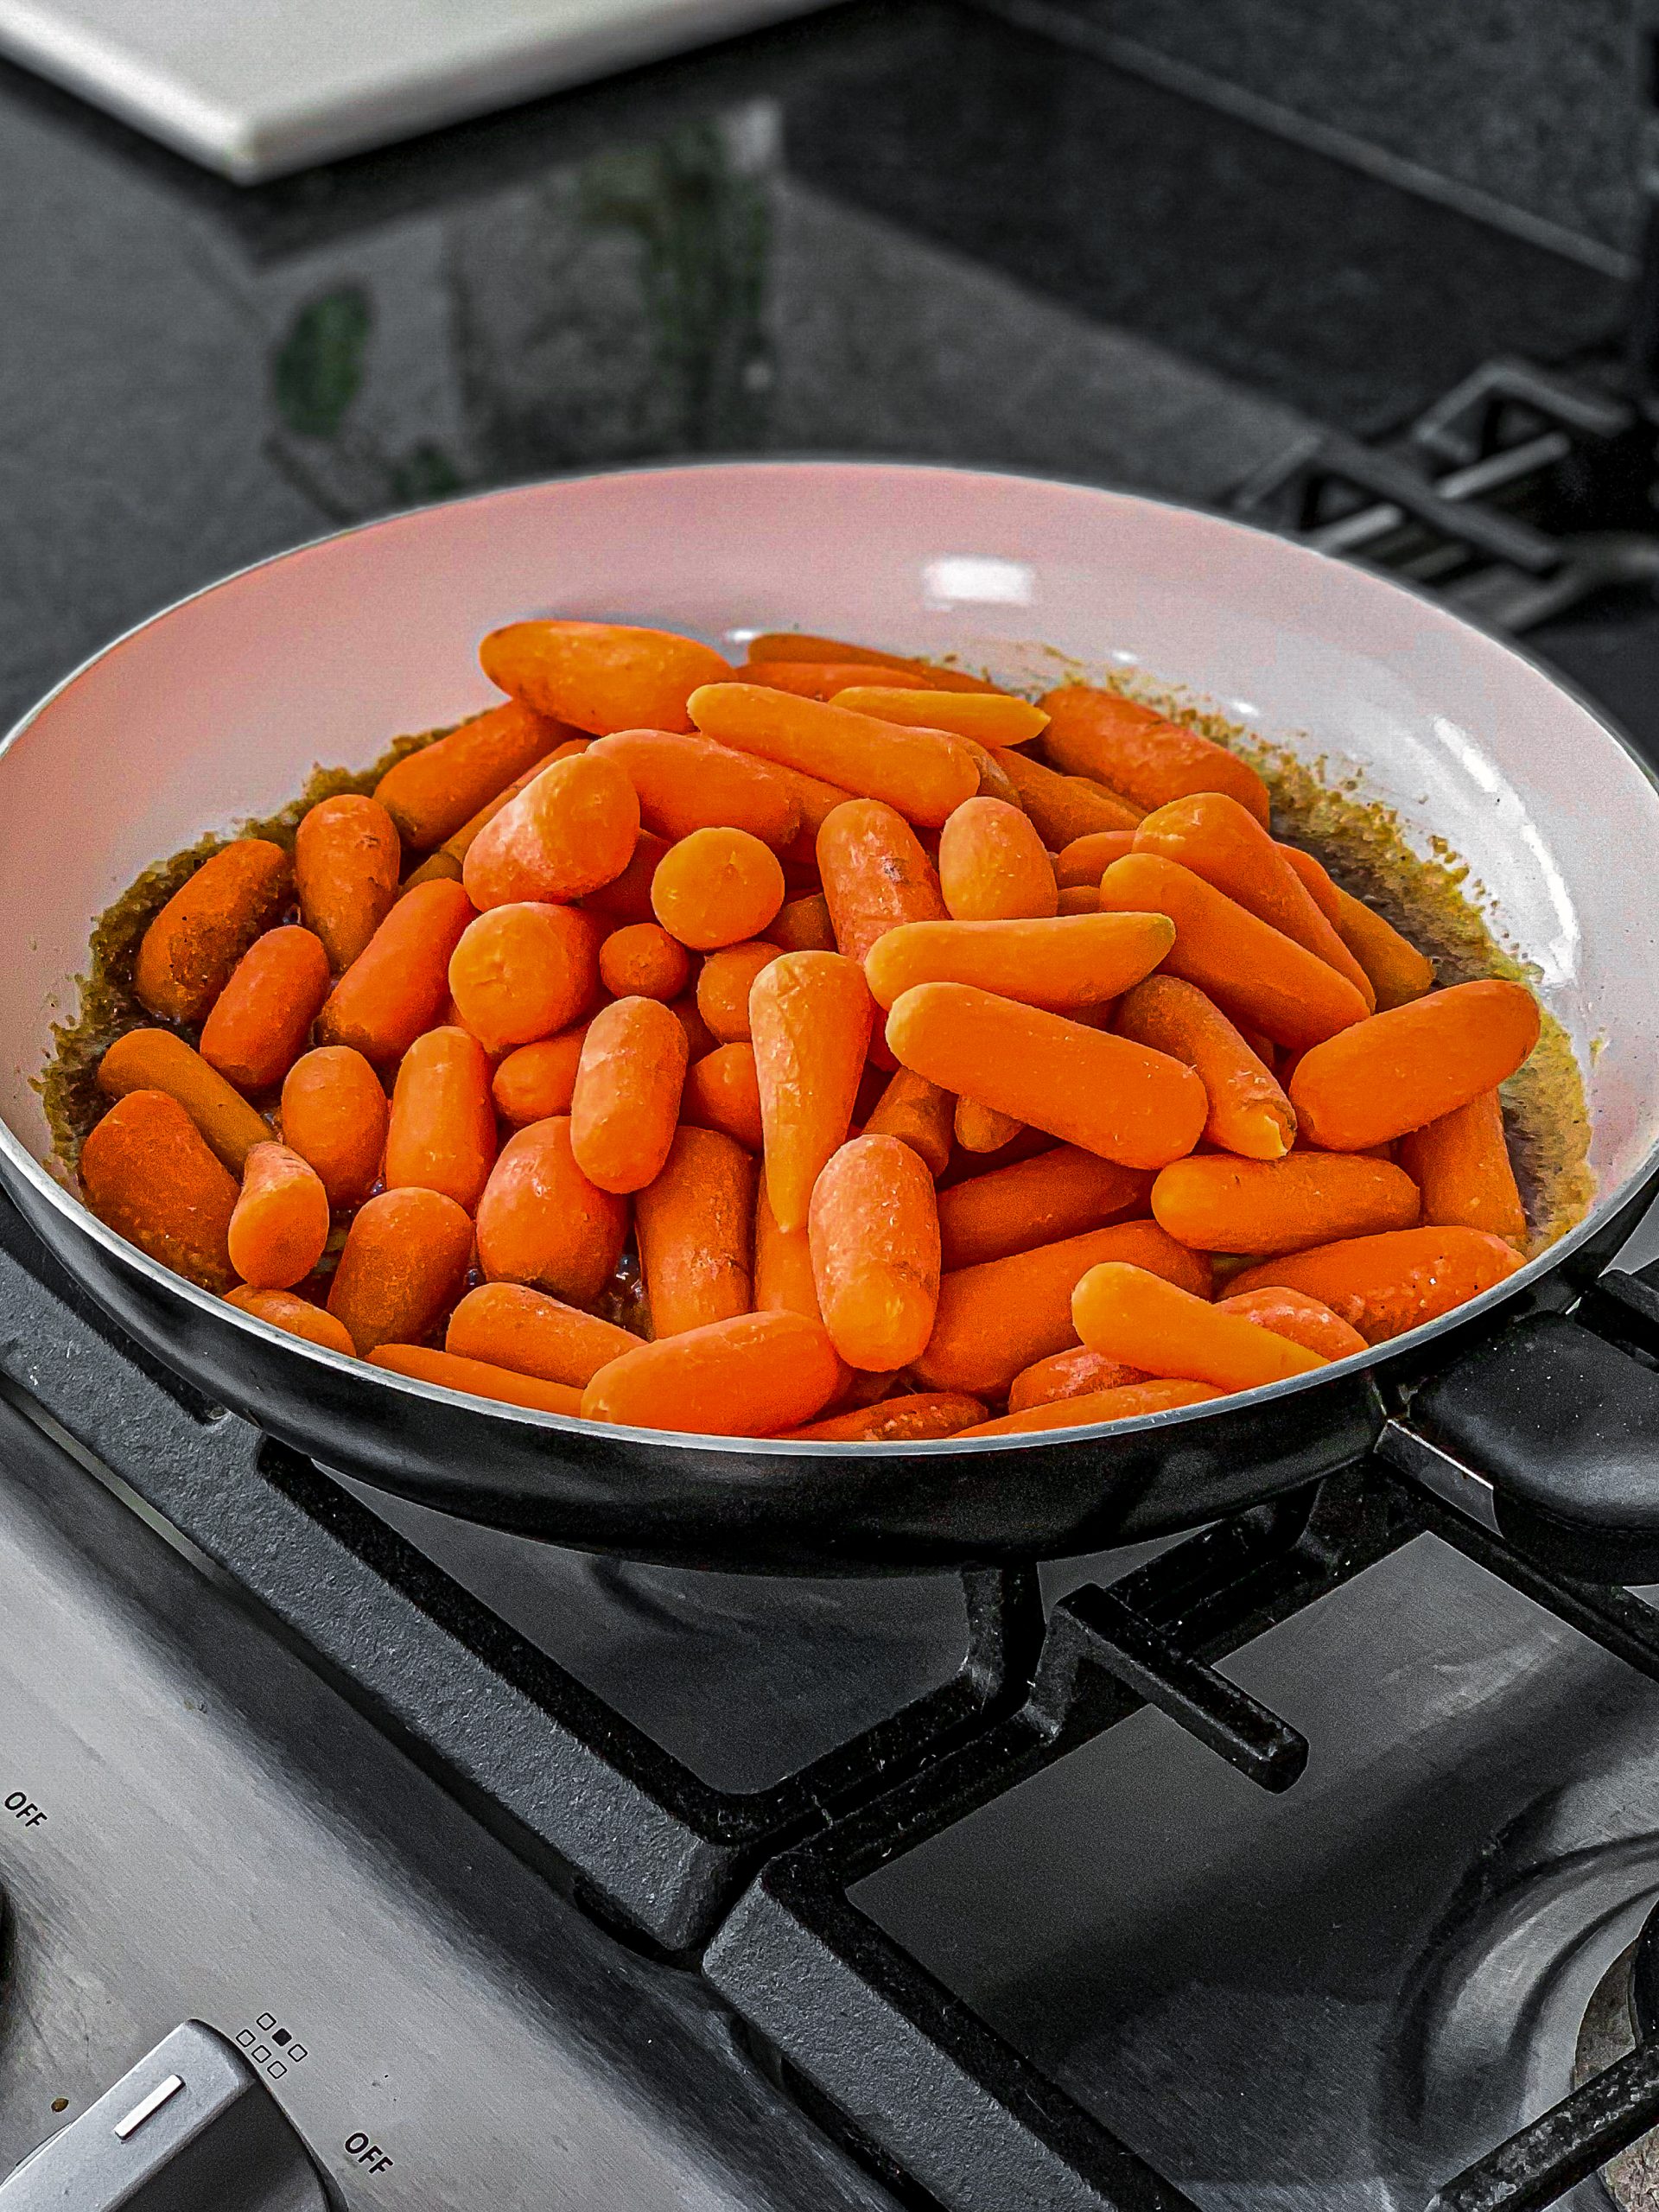 When the glaze is bubbling, add the carrots in the saucepan and toss until well coated.